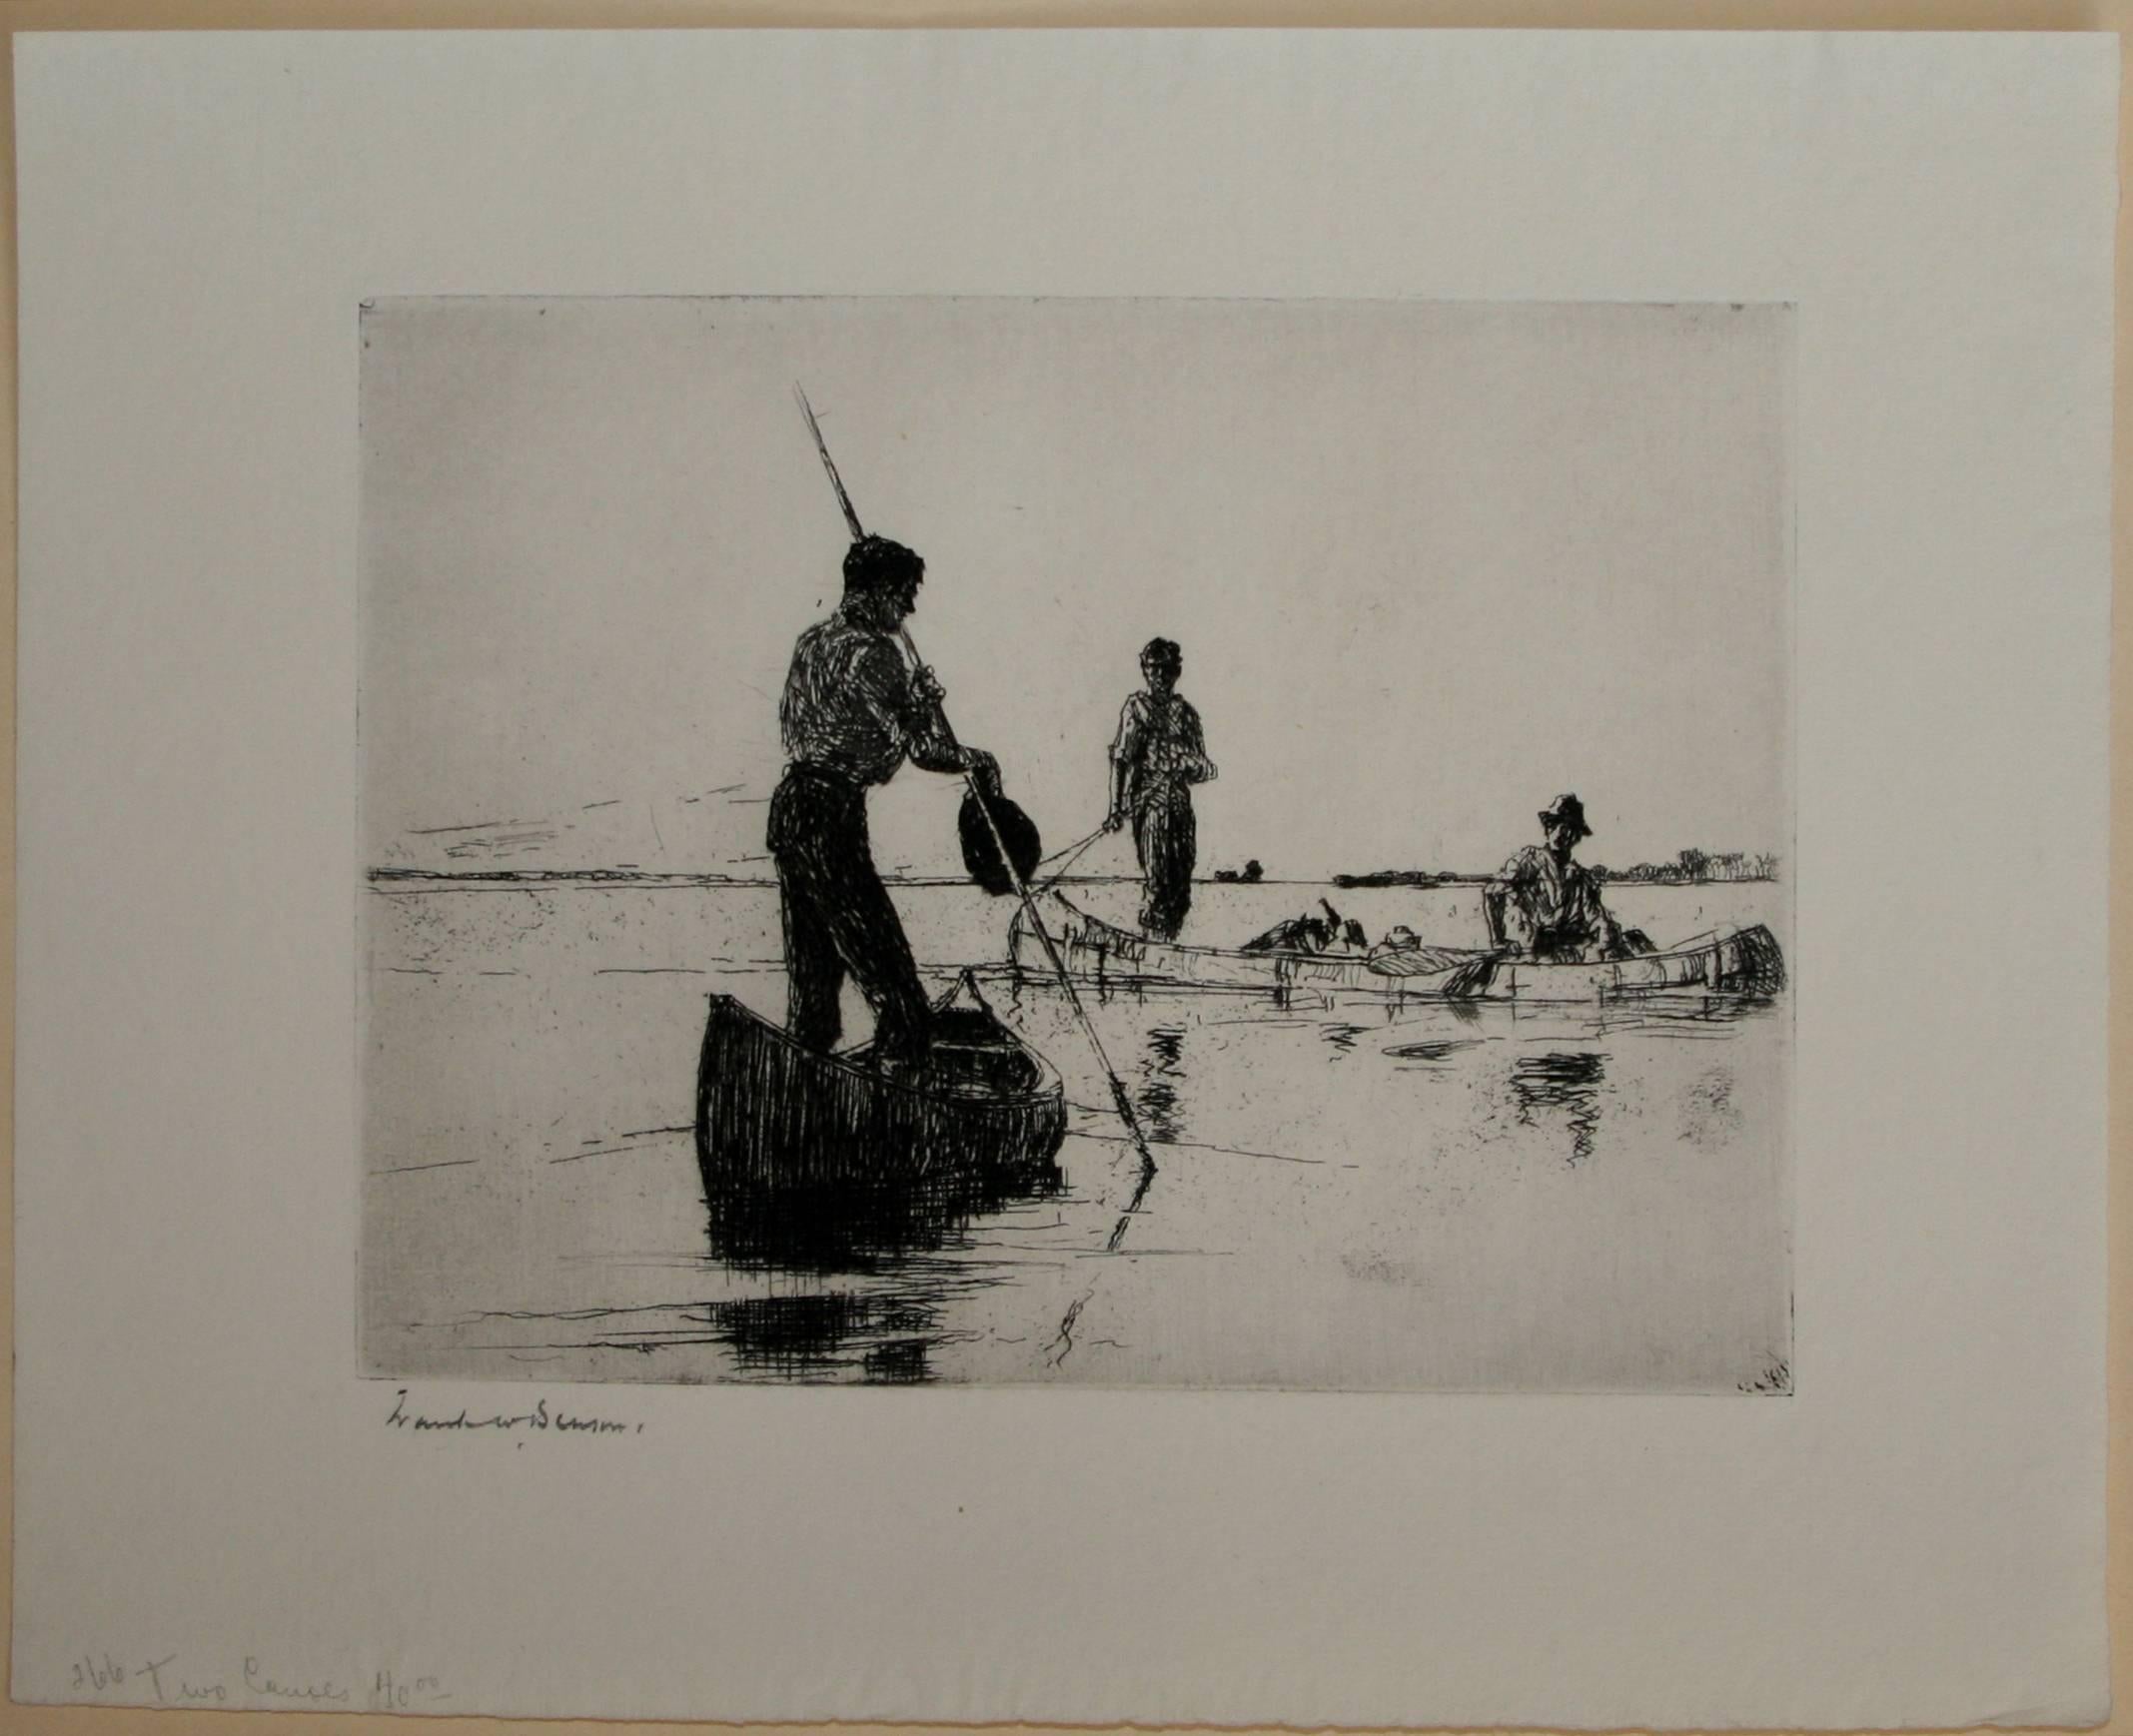 Two Canoes. - Print by Frank Weston Benson